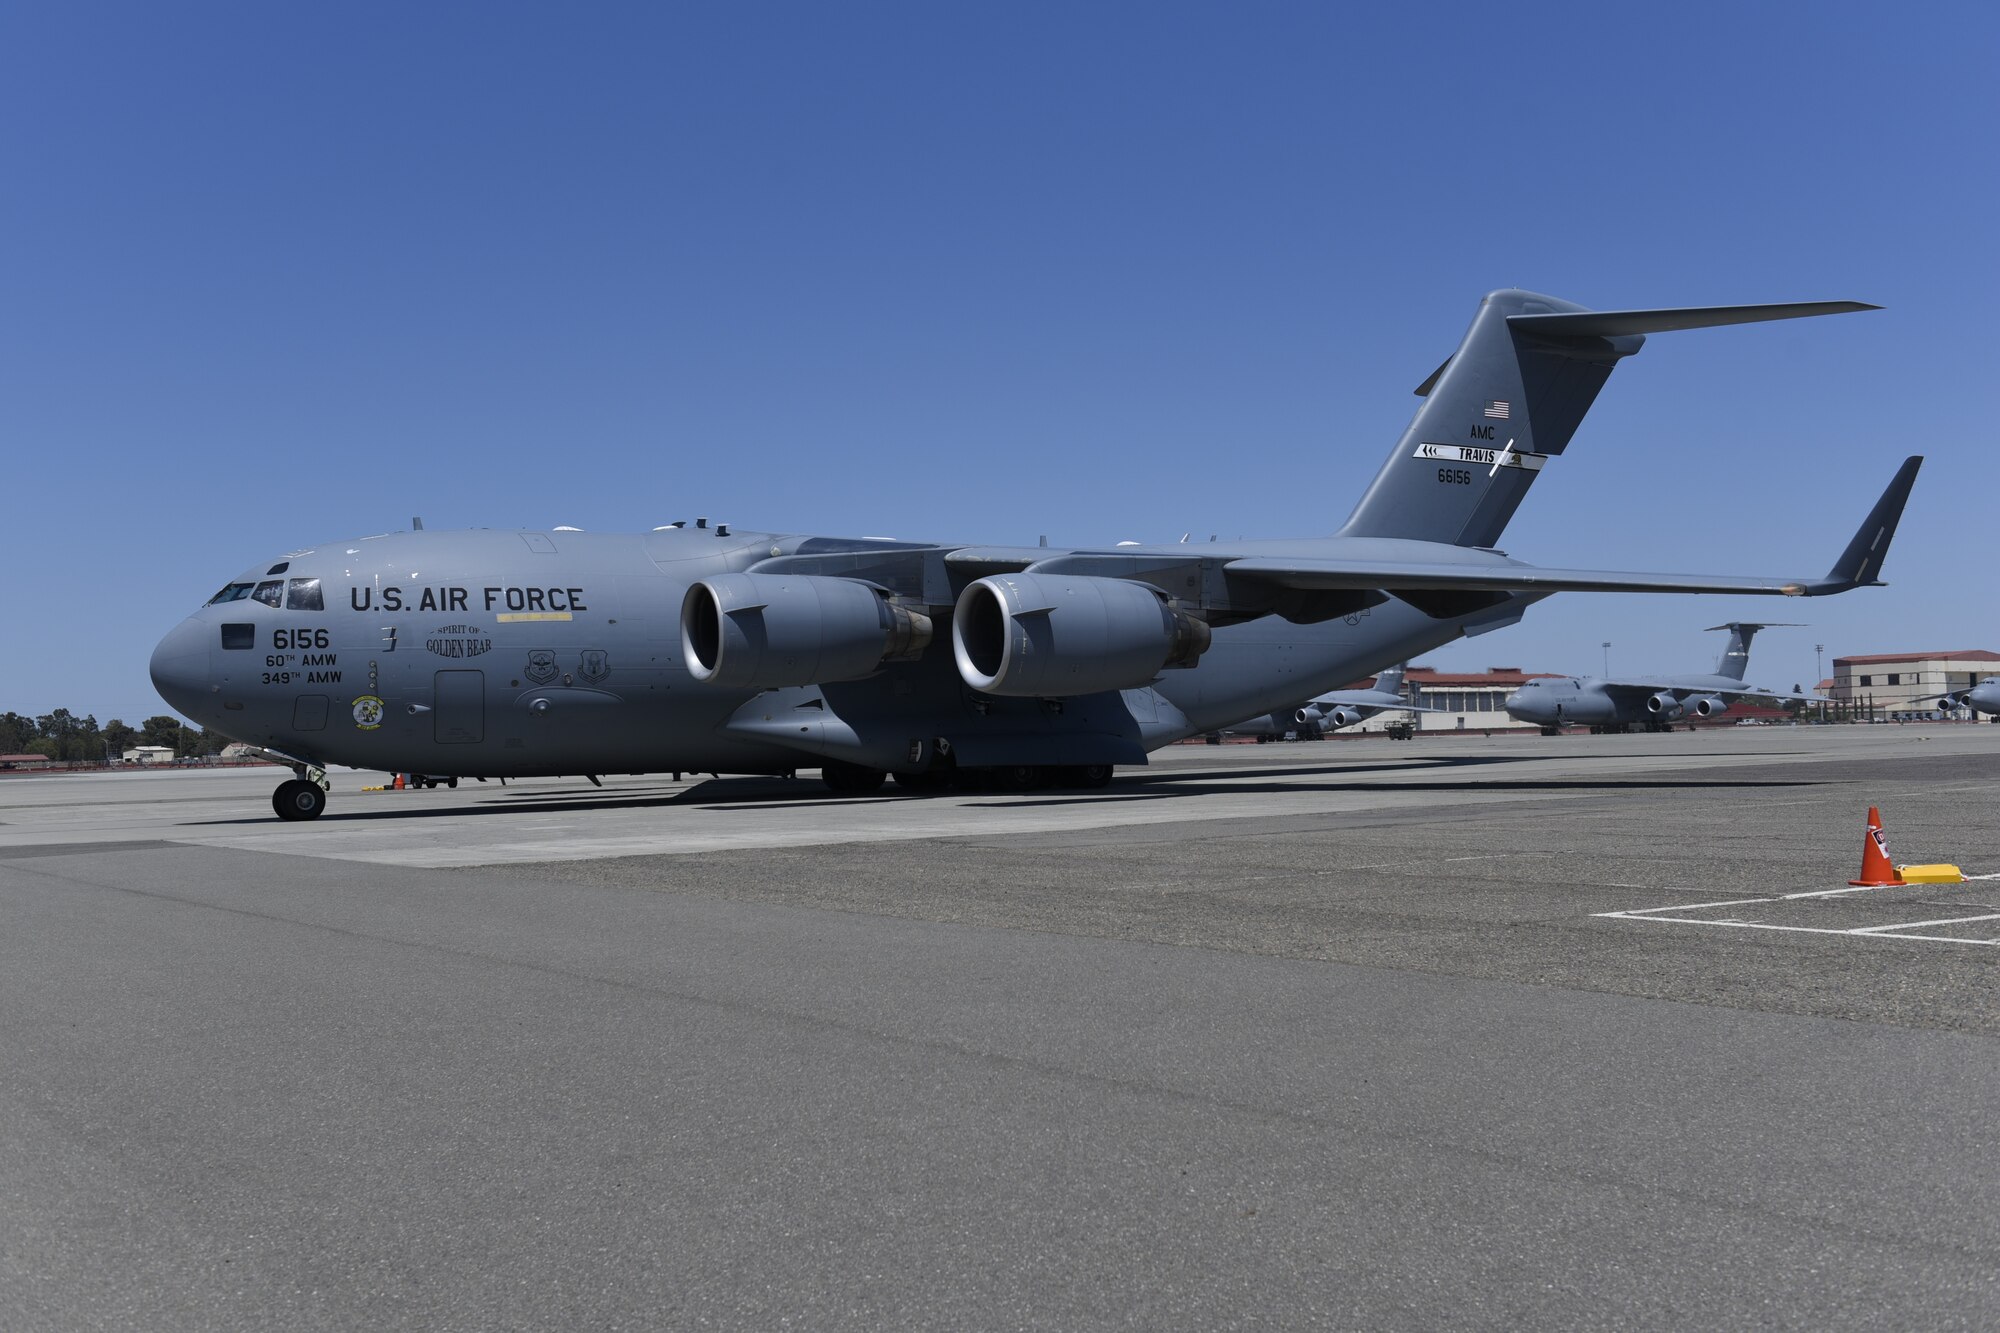 A C-17 Globemaster III with a COVID-19-positive patient onboard is parked on the flight line at Travis Air Force Base, California, July 17, 2020. Travis Airmen transported the patient from the Indo-Pacific Command area of responsibility as part of the Air Force’s response to the COVID-19 outbreak. This transport marked the Air Force’s first TIS mission into the INDOPACOM AOR and the 18th time employing TIS units to transport COVID-19 positive passengers. (U.S. Air Force photo by Airman 1st Class Cameron Otte)